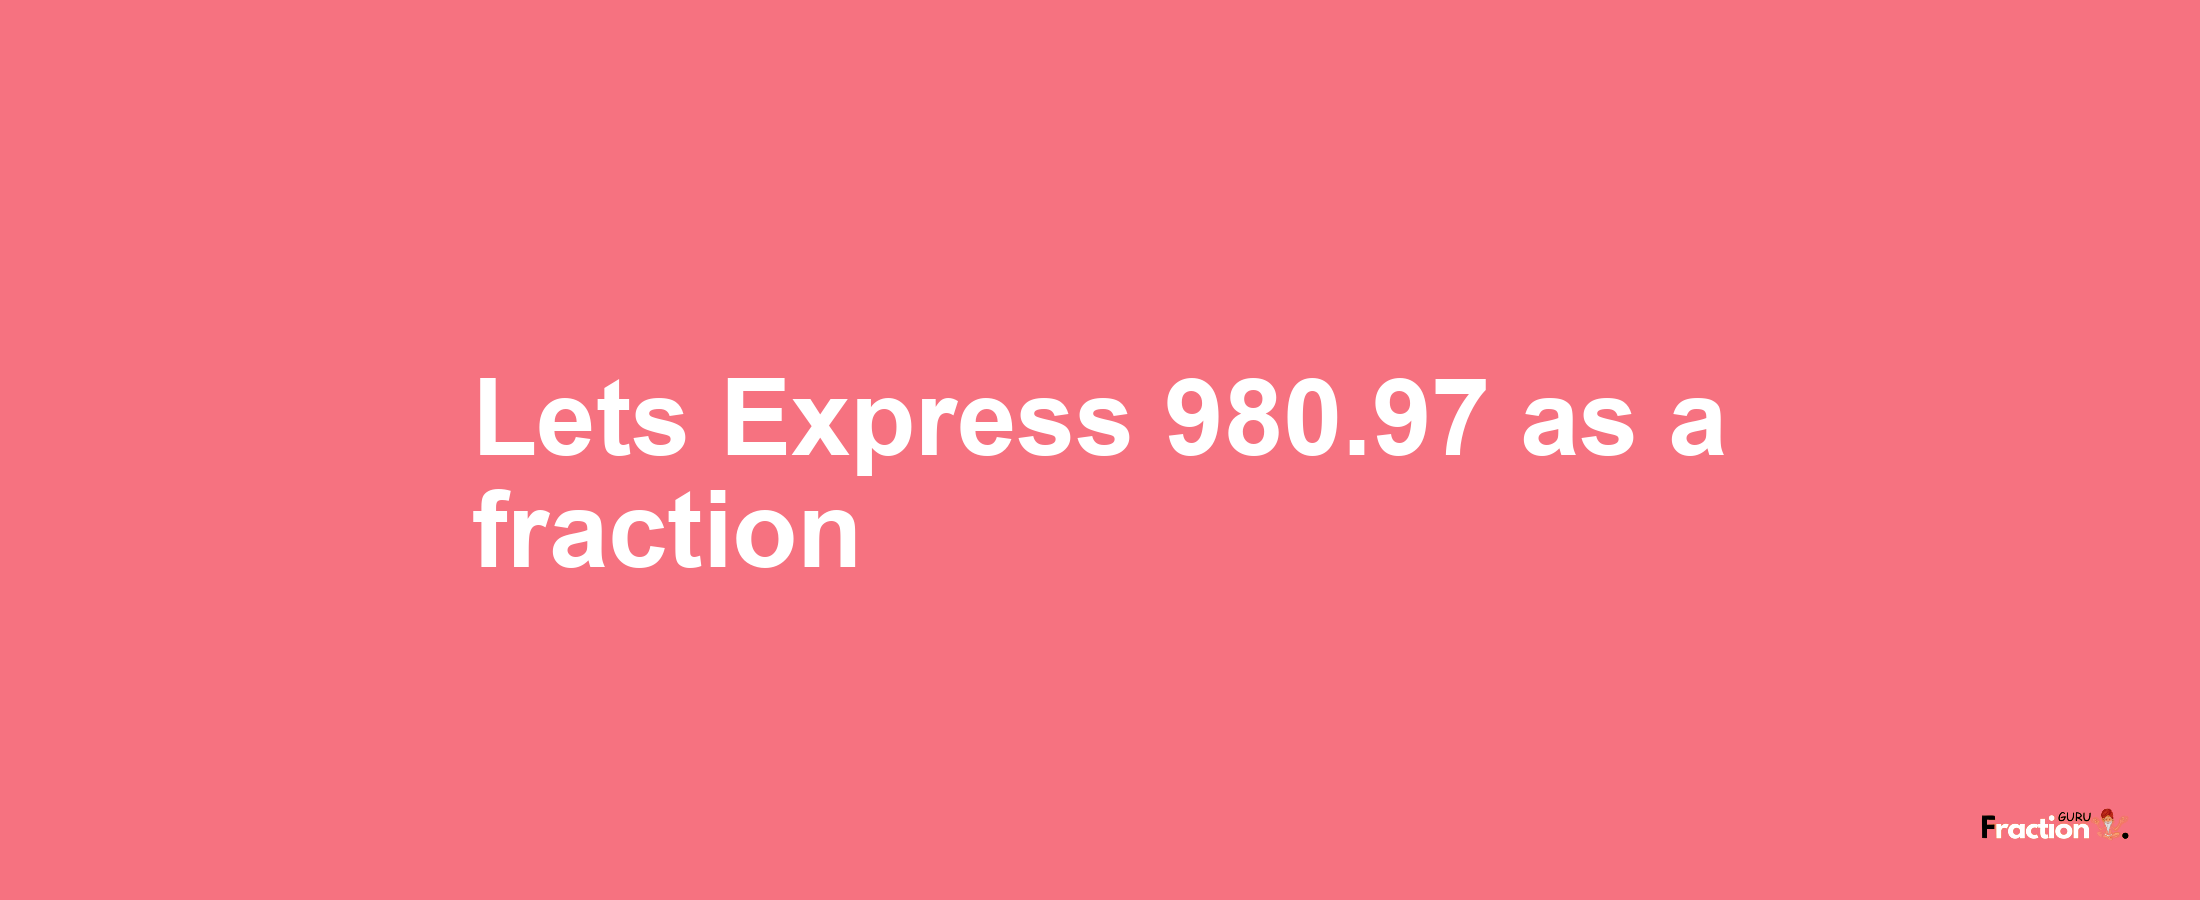 Lets Express 980.97 as afraction